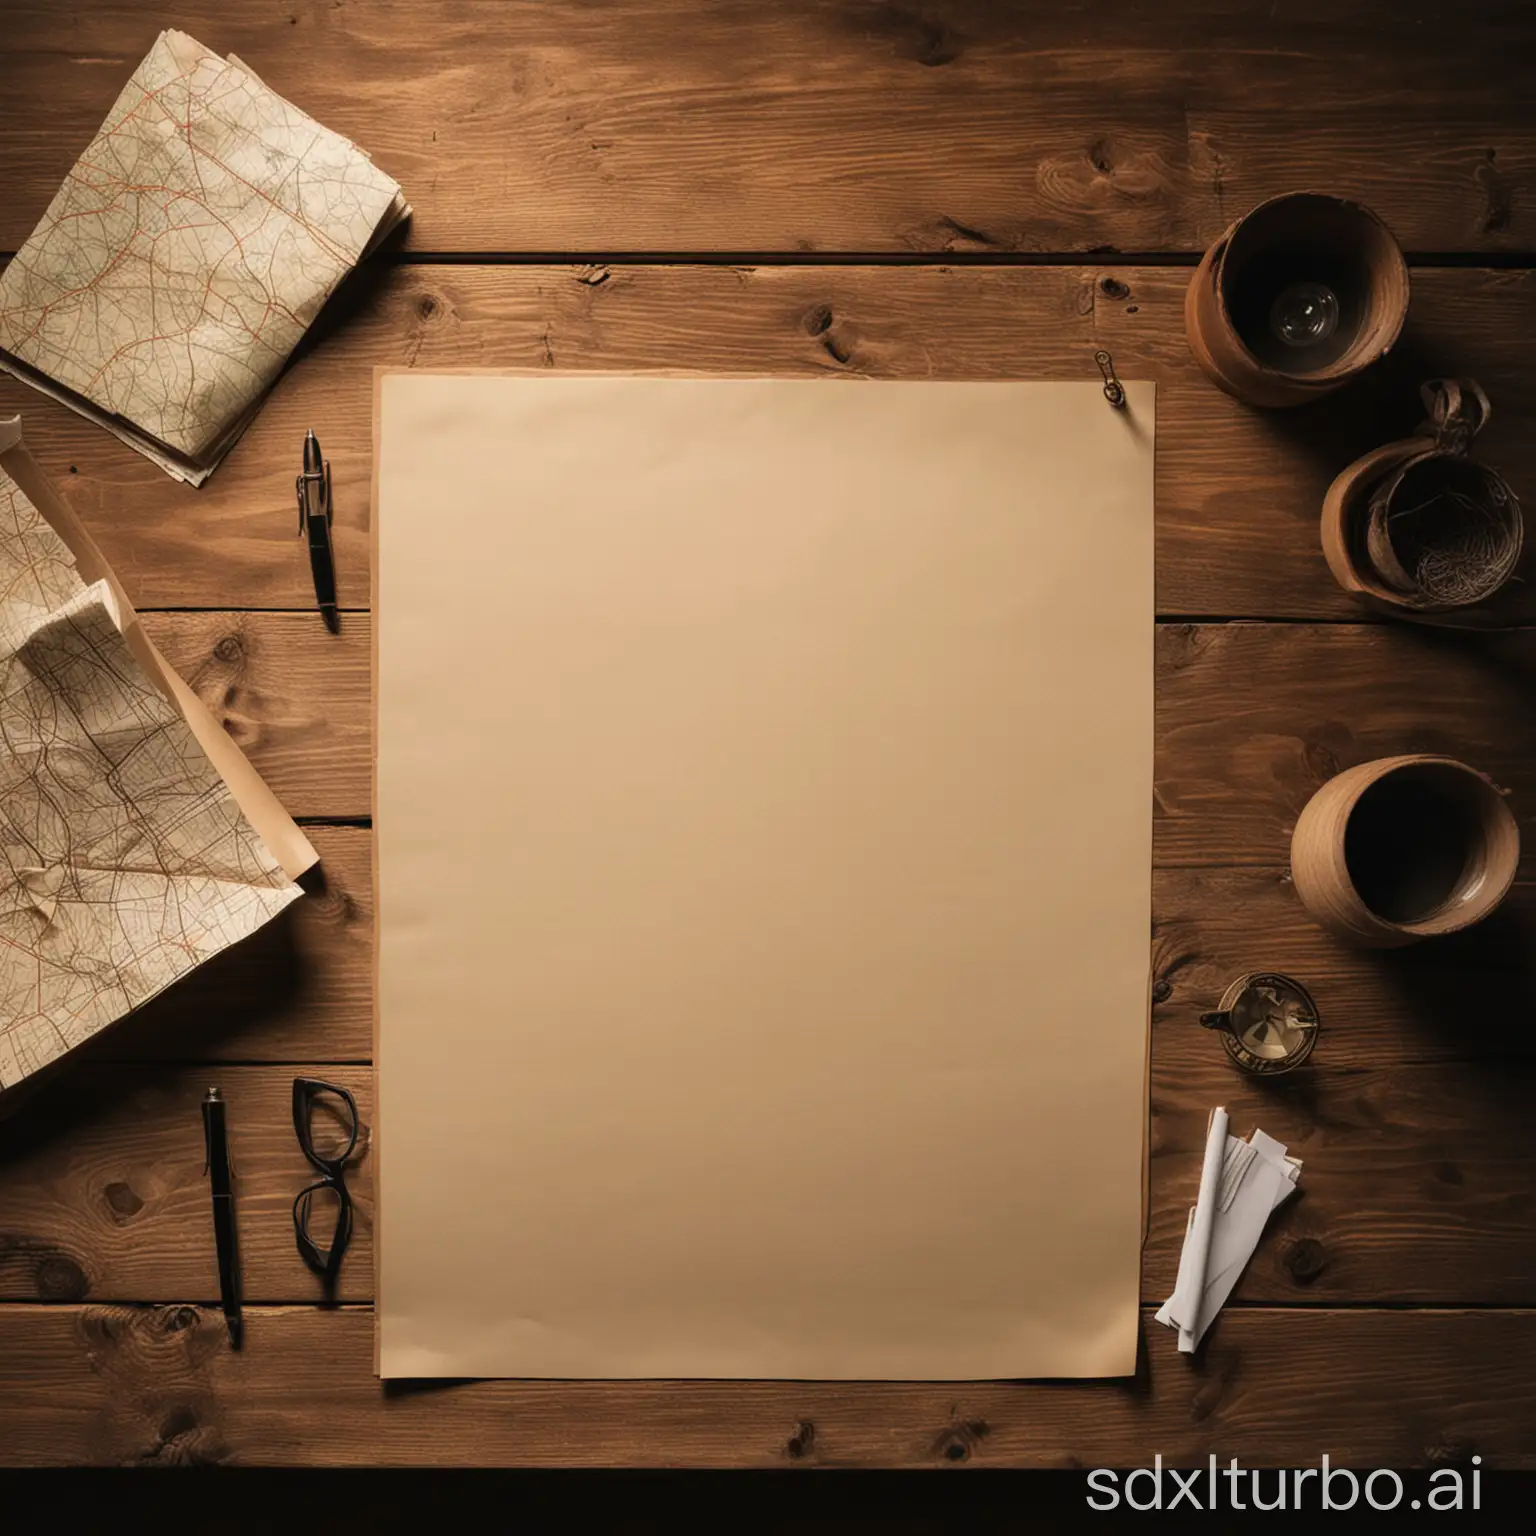 dim light, grim light, overhead view, wooden desk with a blank sheet of paper on it, blank sheet of paper, maps, writing utensils